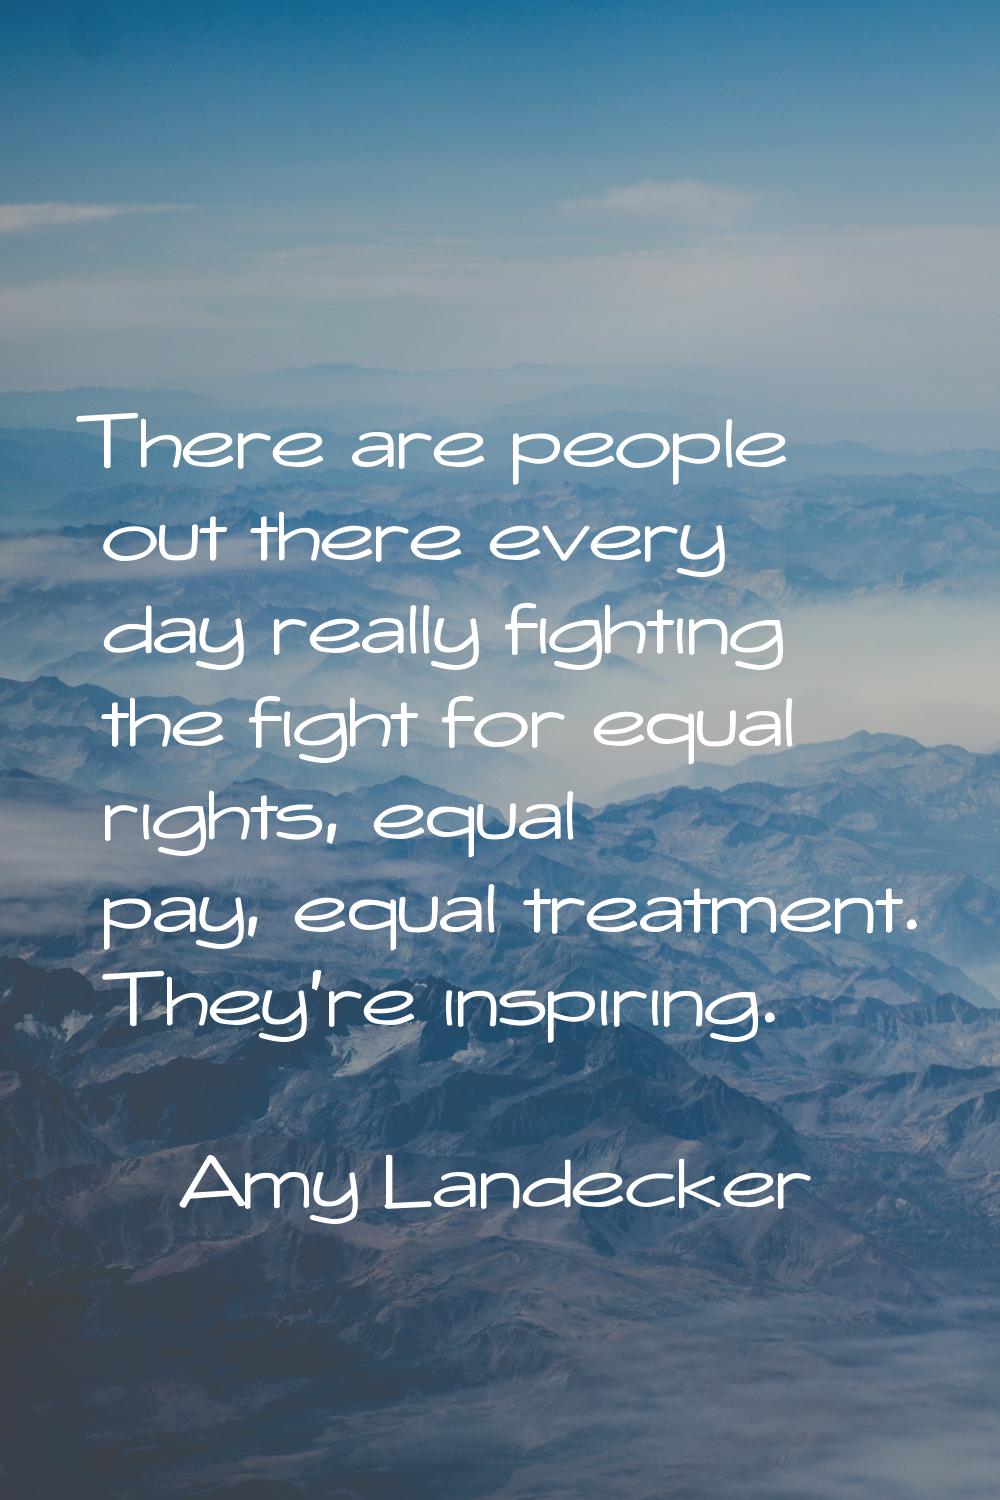 There are people out there every day really fighting the fight for equal rights, equal pay, equal t